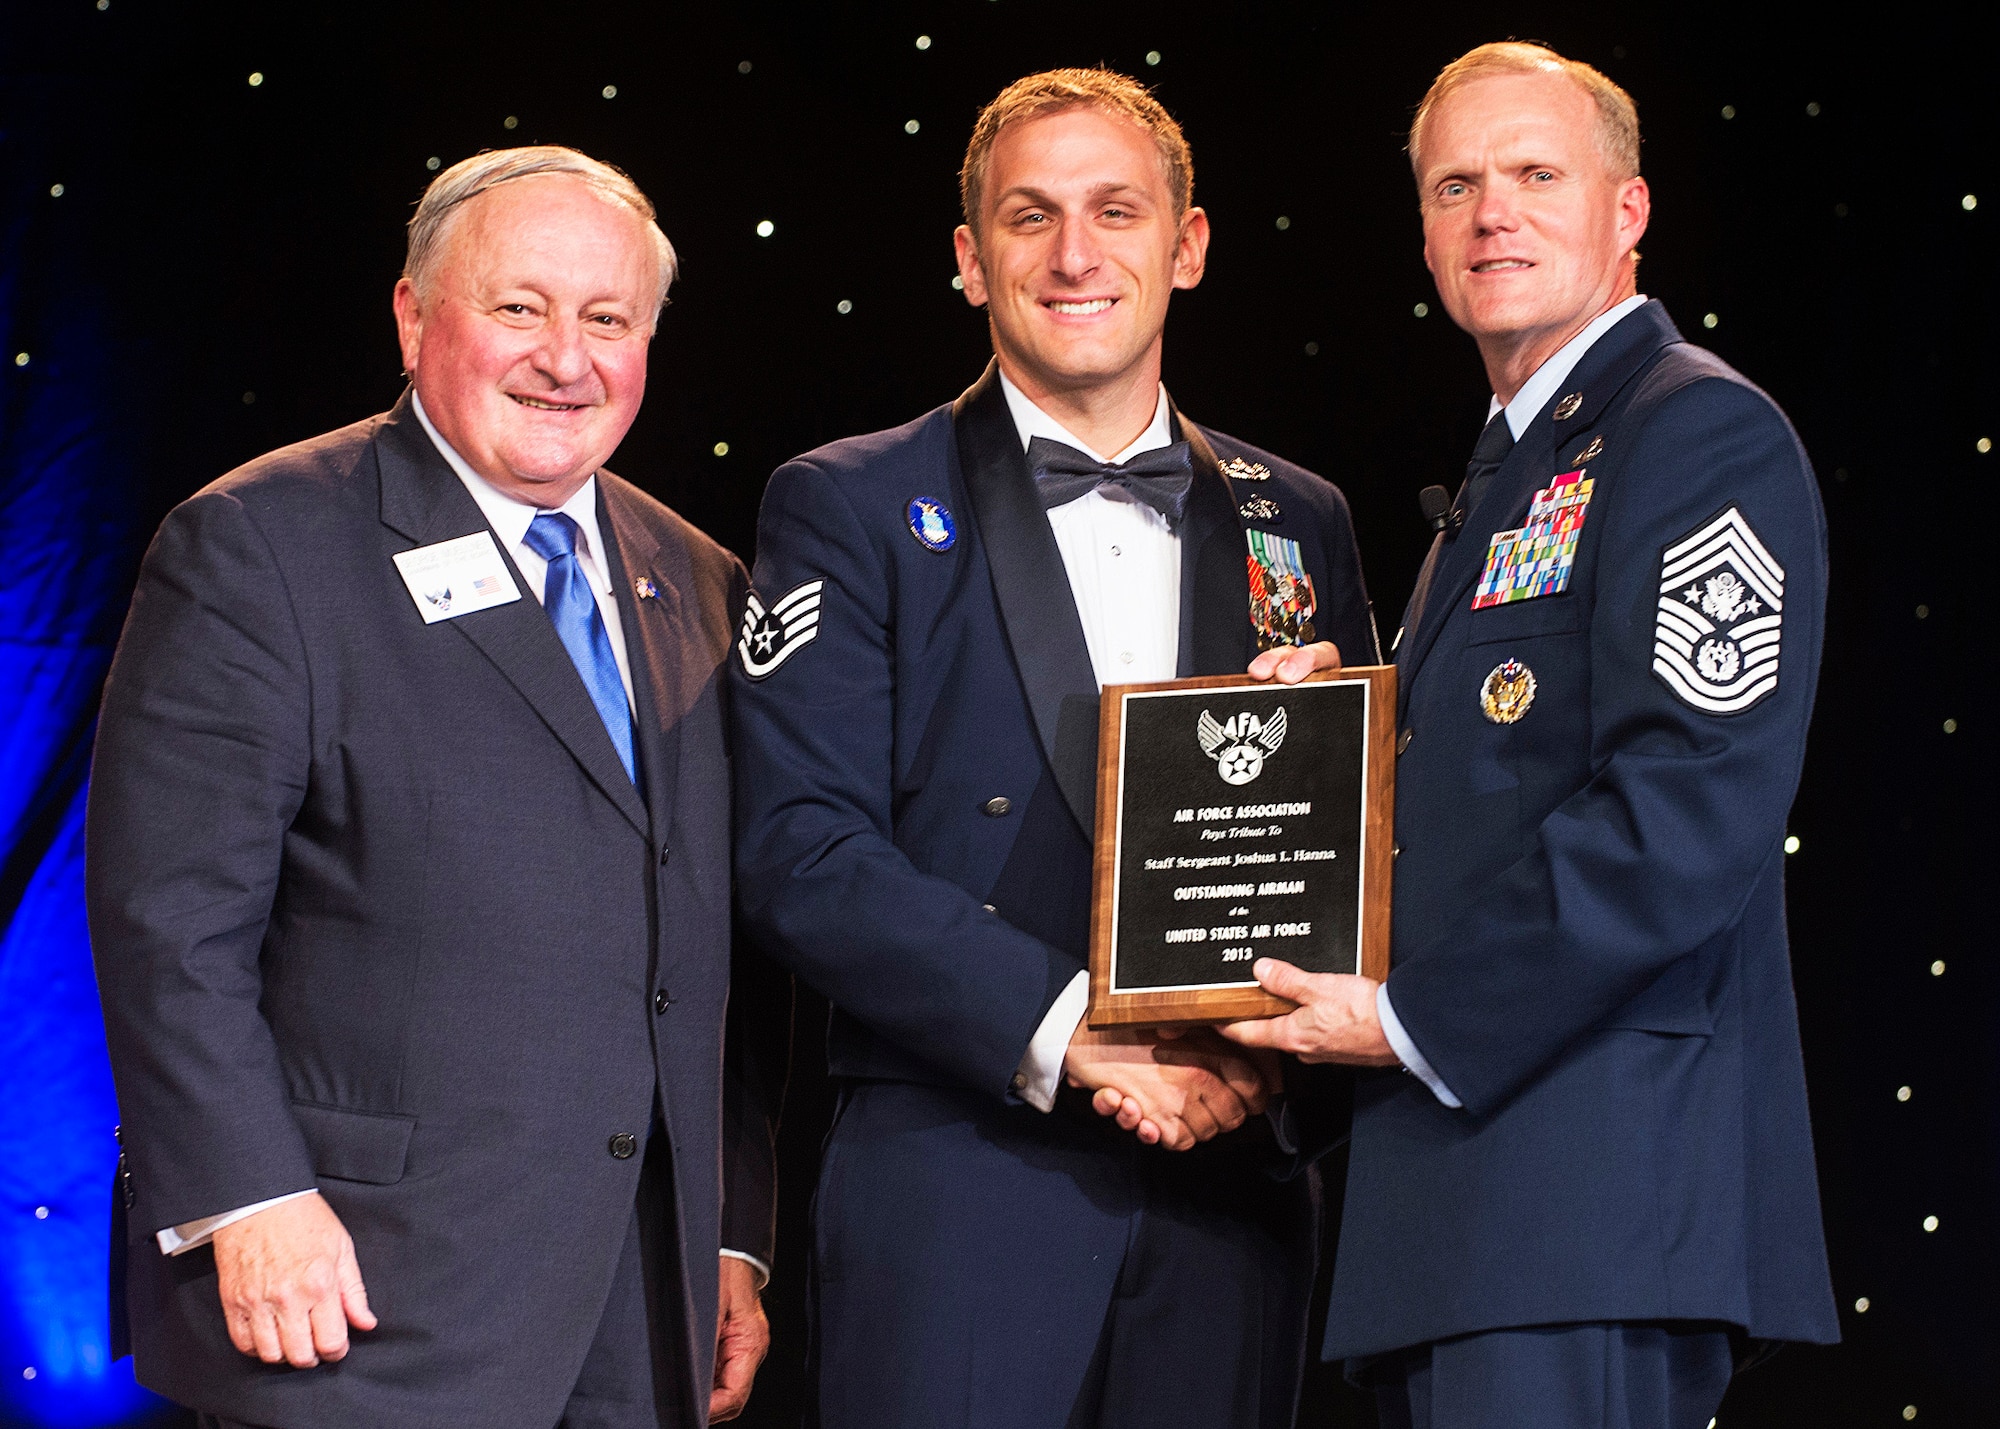 Staff Sgt. Joshua Hanna was recognized as one of the 12 Outstanding Airmen of the Year at a reception and awards dinner hosted by the Air Force Association during the AFA's annual Air & Space Conference and Technology Exposition Sept. 16, 2013, in Washington, D.C. The OAY award recognizes the top 12 outstanding enlisted Airmen for superior leadership, job performance, community involvement and personal achievements. Hanna is an explosive ordnance disposal journeyman with the 36th Civil Engineer Squadron at Andersen Air Force Base, Guam. (U.S. Air Force photo/Jim Varhegyi)